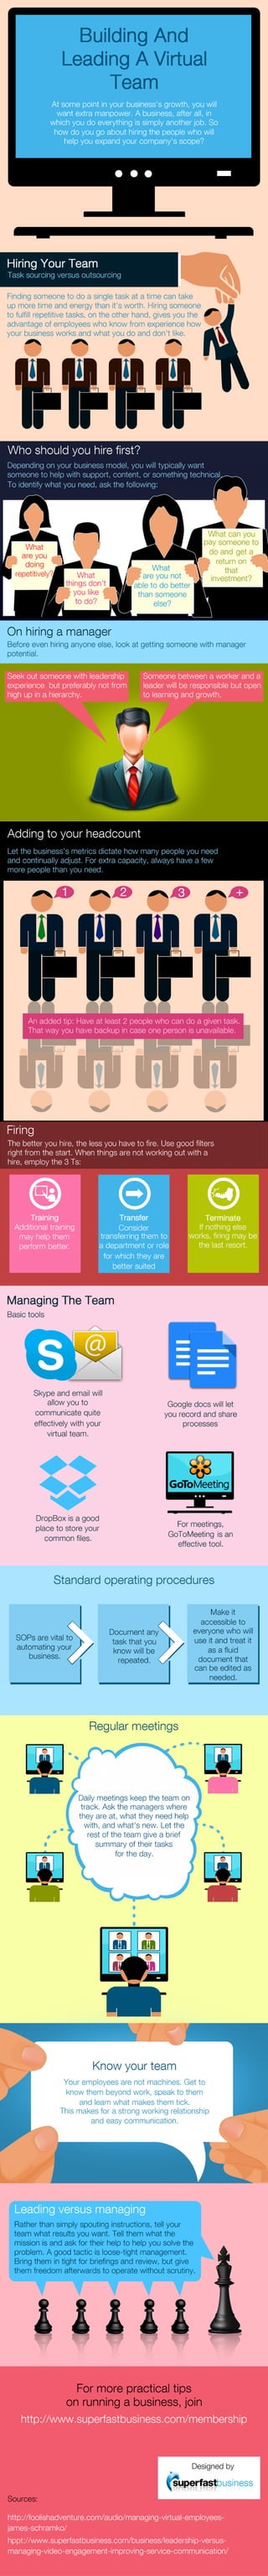 Hiriing And Management Of A Virtual Team